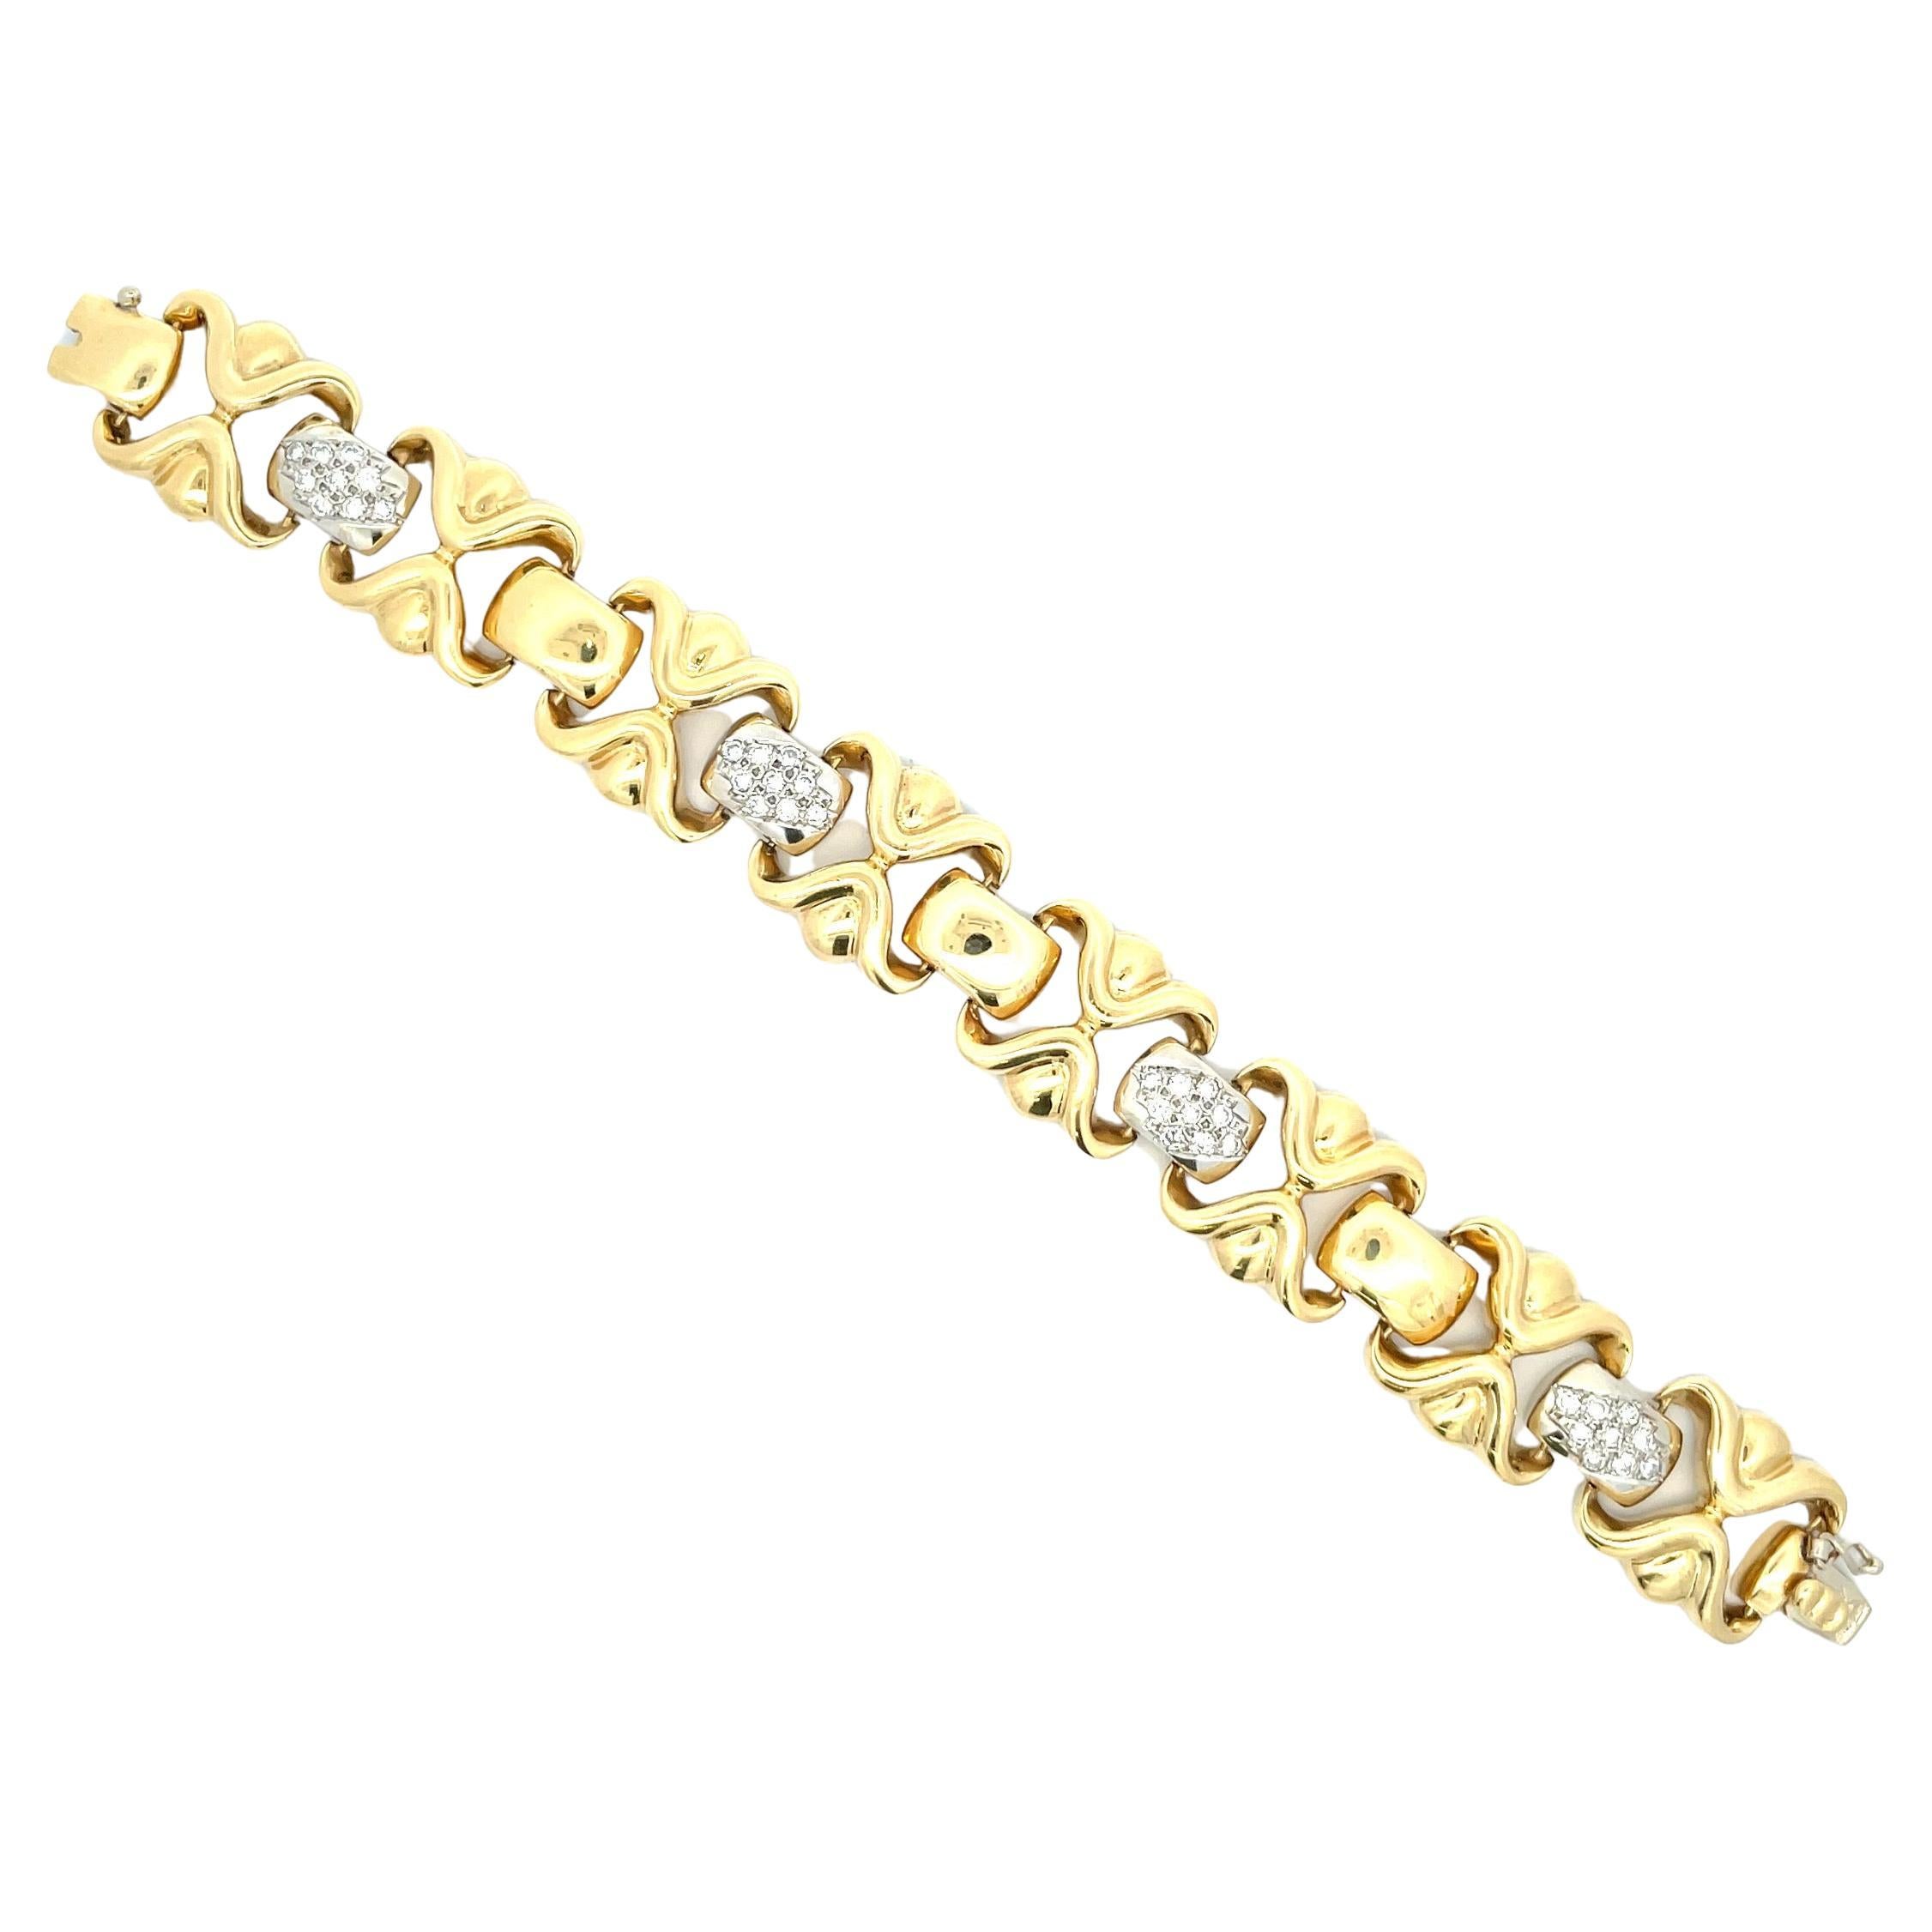 18 Karat yellow gold bracelet featuring 8 gold links with diamond bars in between weighing 1.80 Carats.
63 Grams
Made in Italy
36 Diamonds 
Diamond Bar measures 0.50 inch long
Gold Bar measures 0.73 inch wide x 0.74 long
